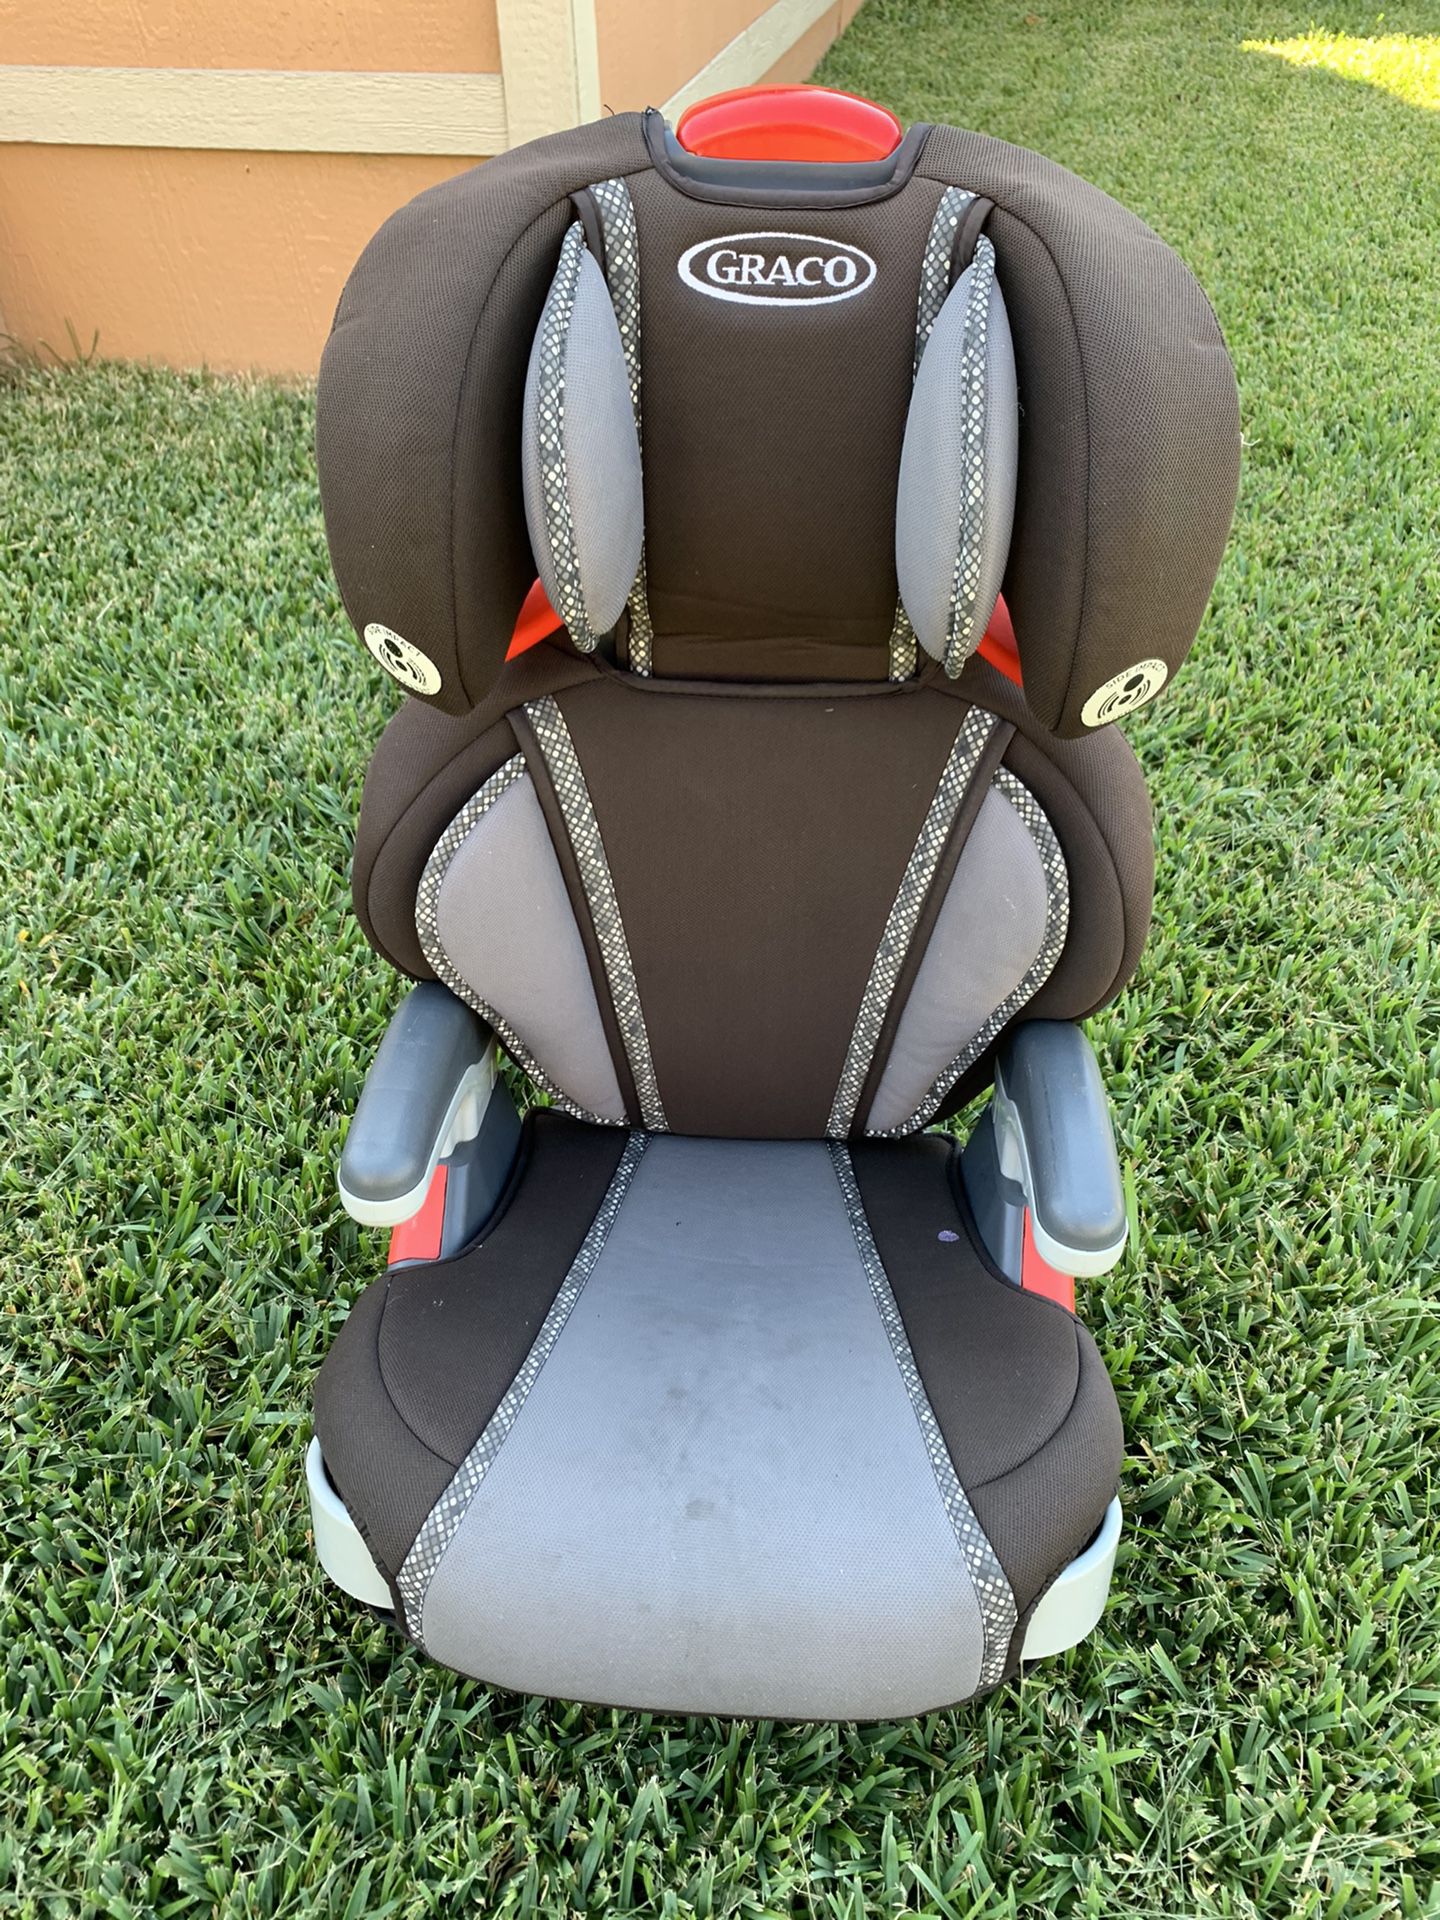 Graco booster car seat